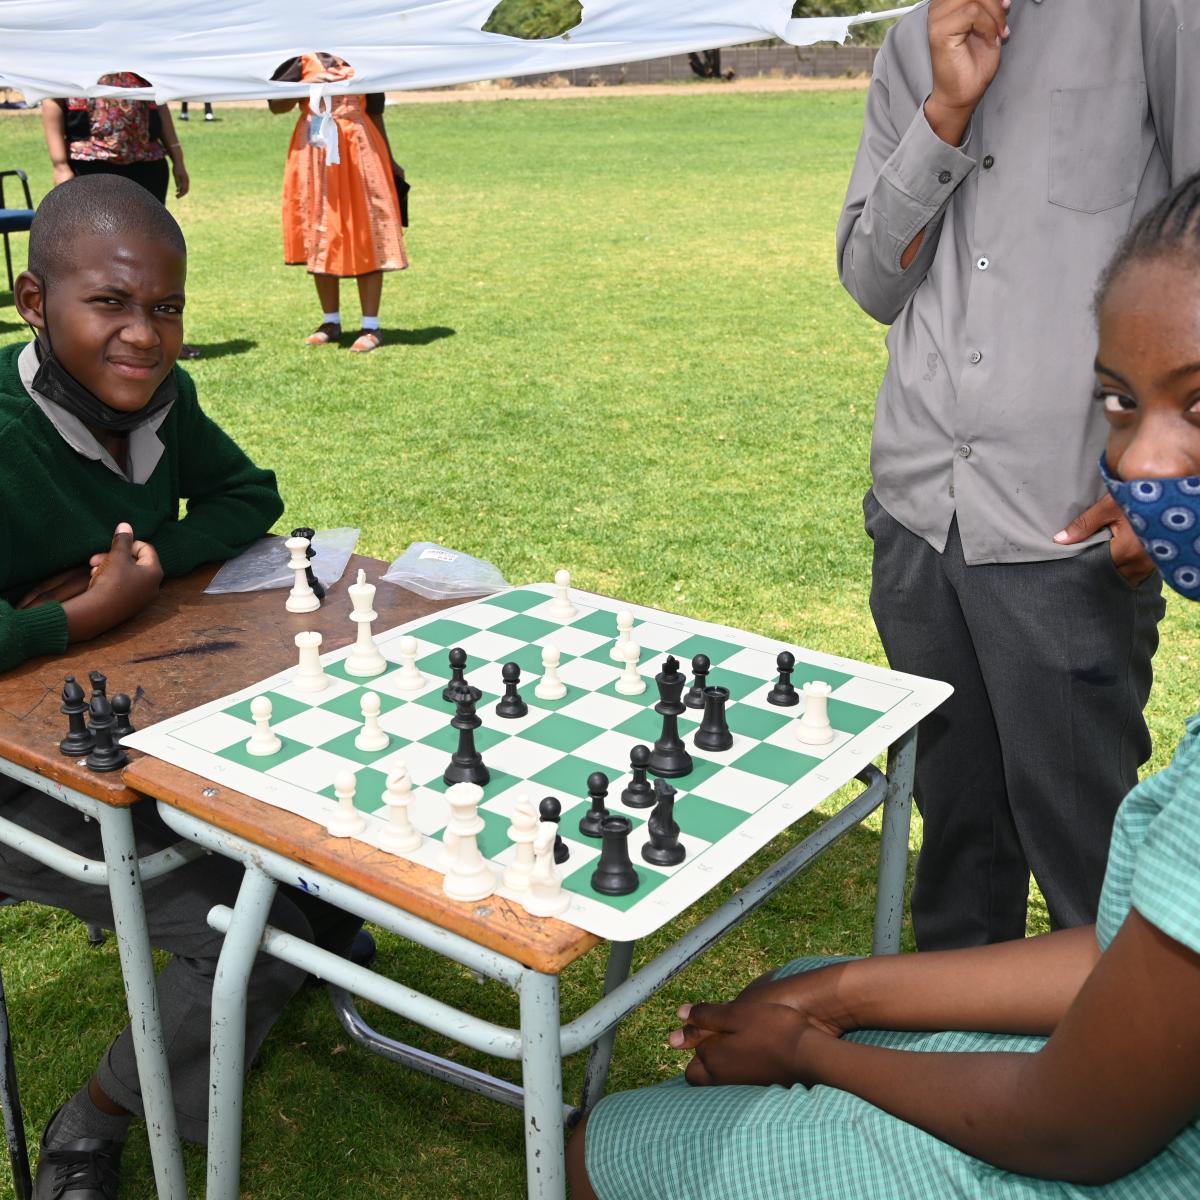 Seven-graders Josef Iifo and Yassira Princess Ndapopilwa are battling it out in a match with one of the donated chess boards.